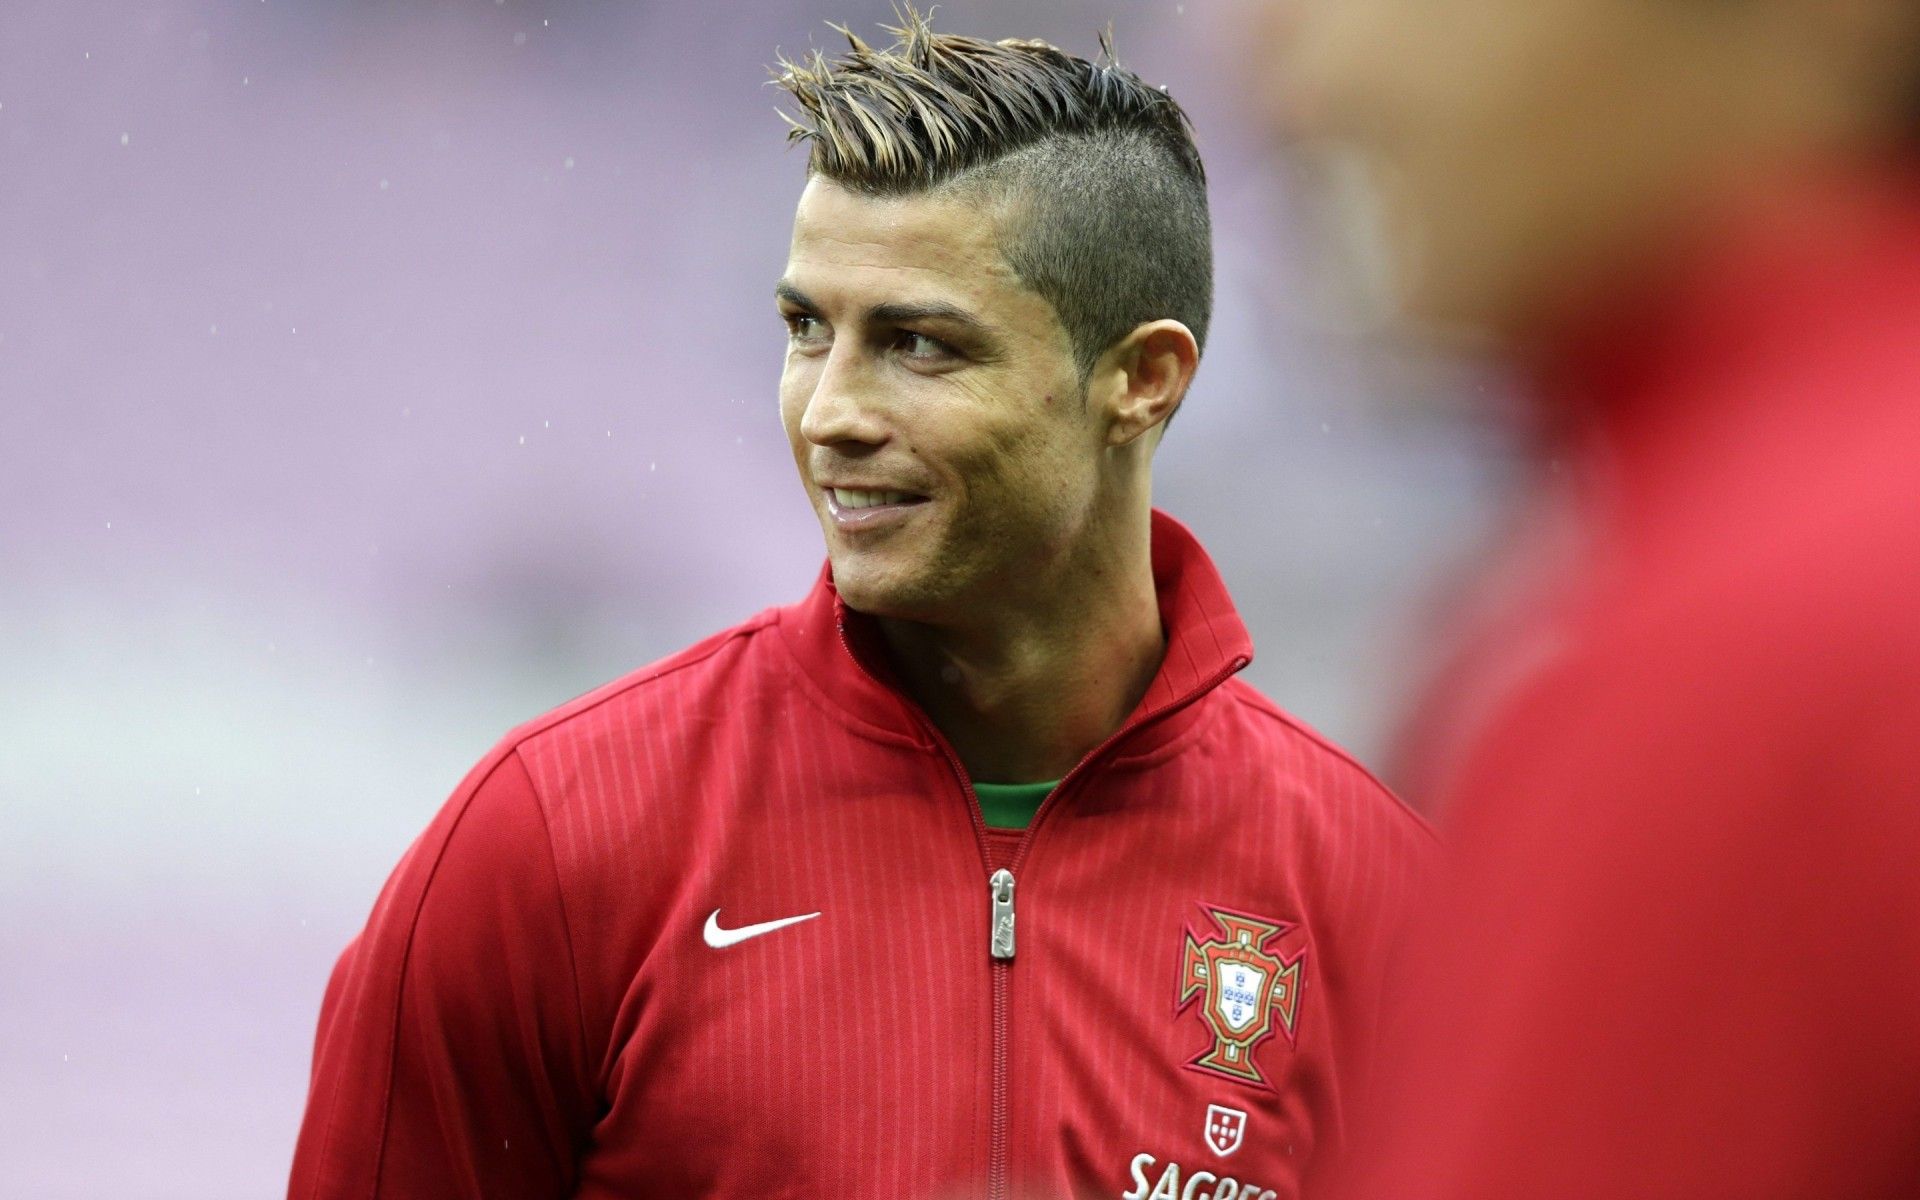 Cristiano Ronaldo Hairstyle Ideas Which You Can Copy. Soccer